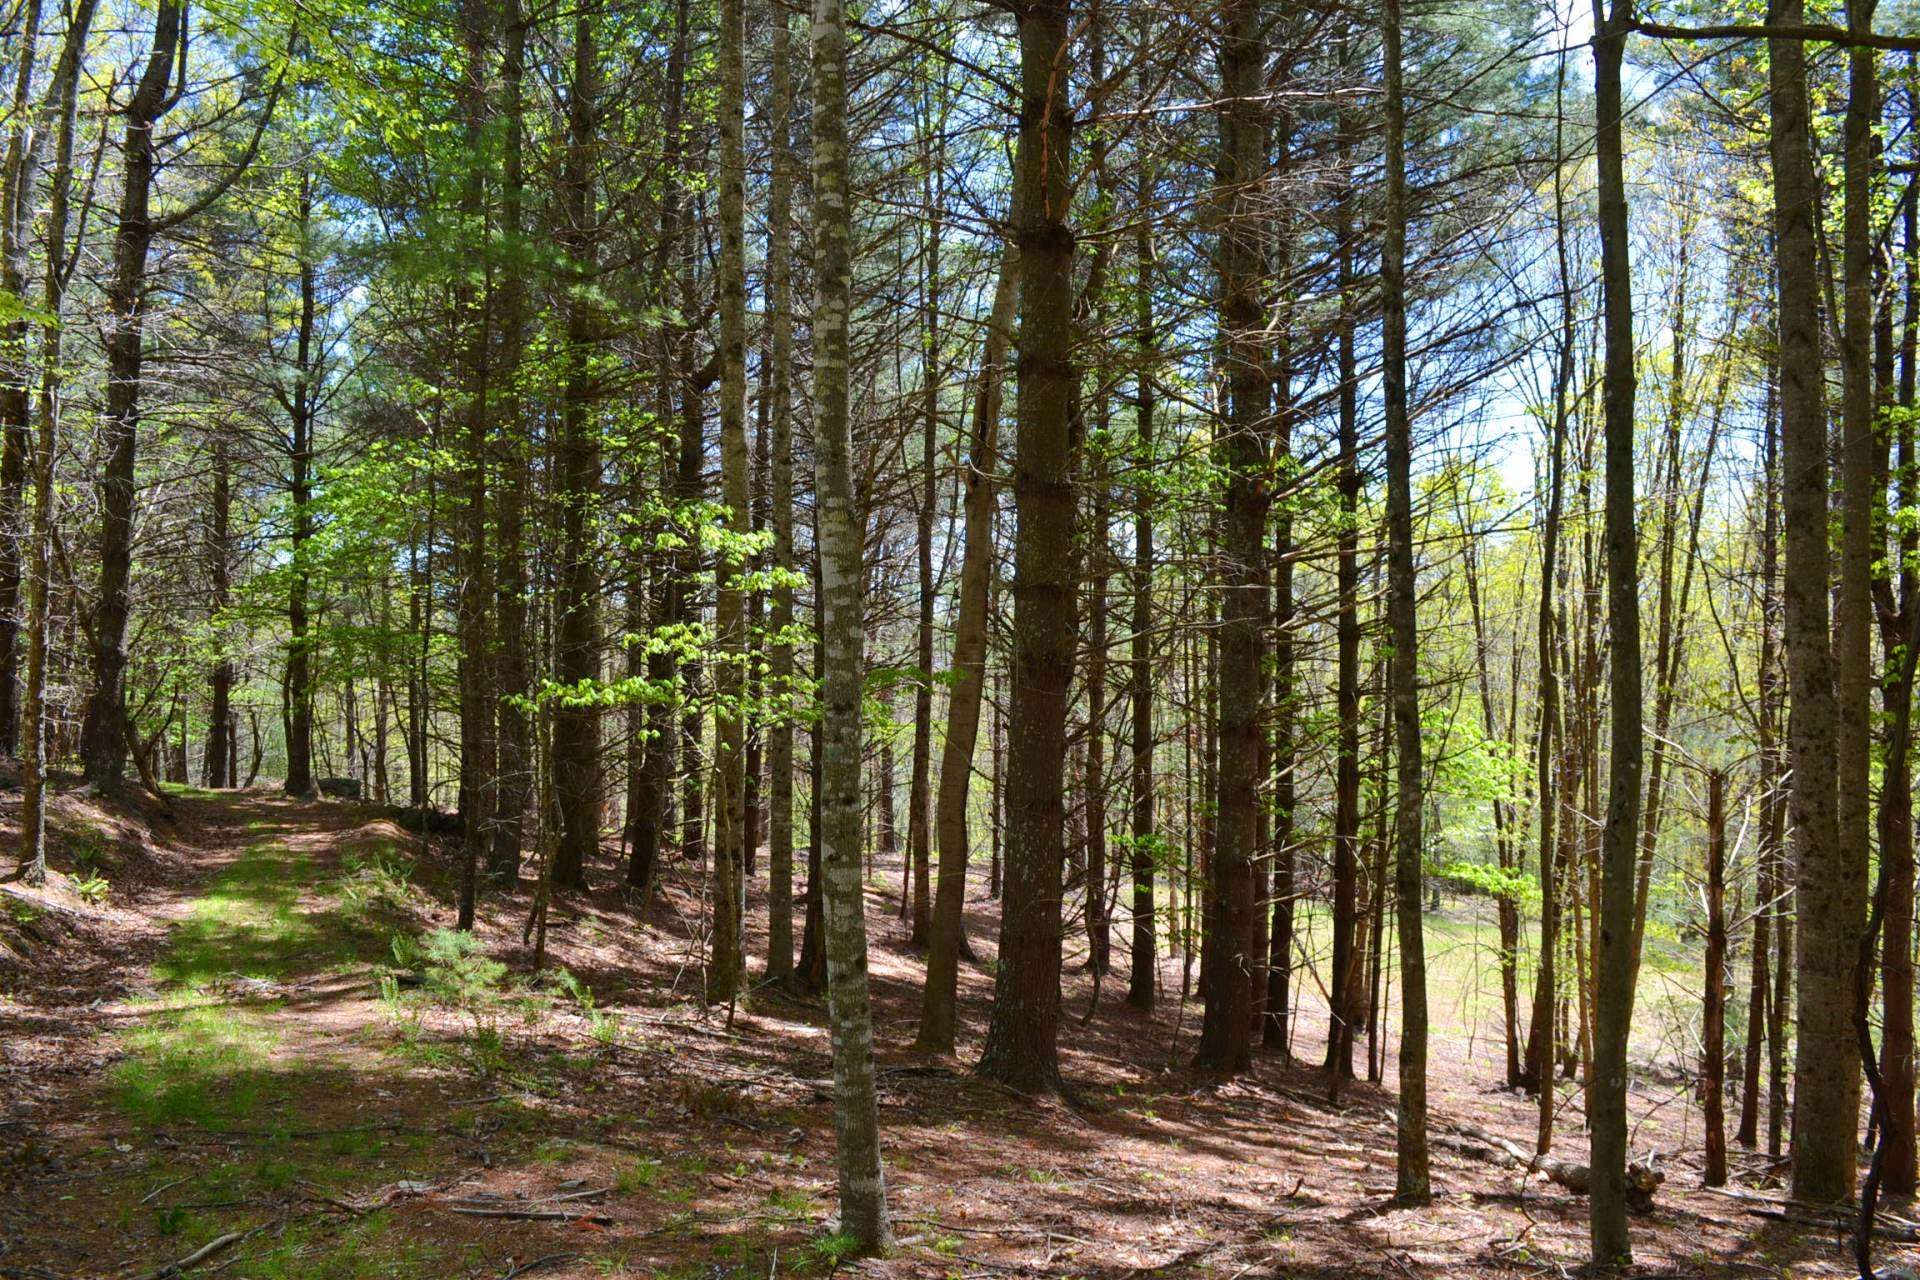 The avid hunter will appreciate the many trails, feeding plots and deer stands located throughout the property.